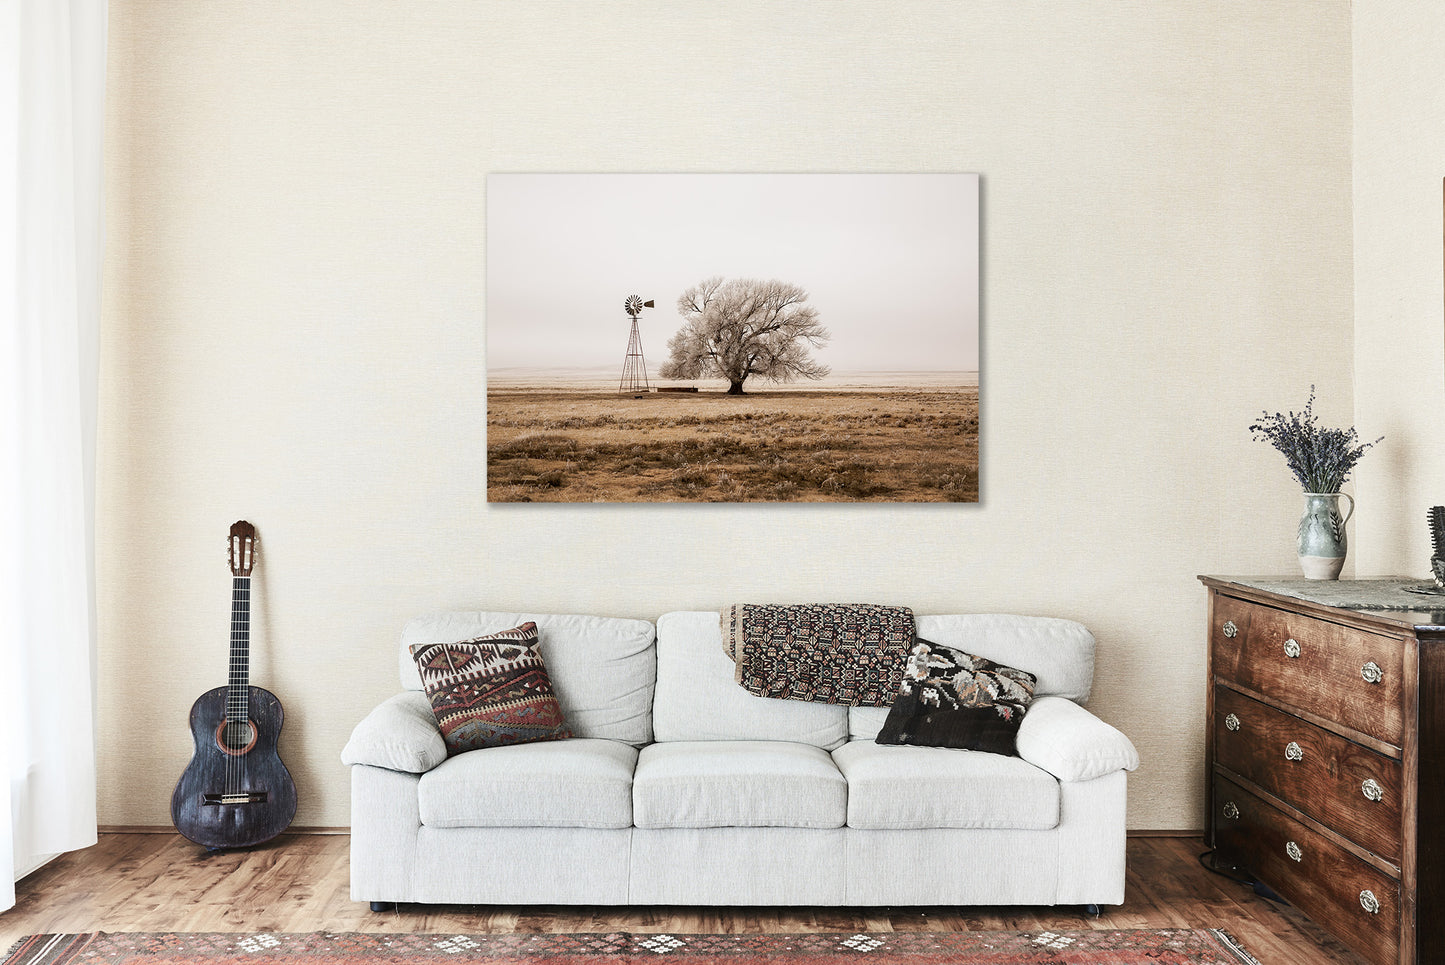 Country Metal Print (Ready to Hang) Photo of Tree and Windmill Covered in Frost in New Mexico Farm Wall Art Farmhouse Decor